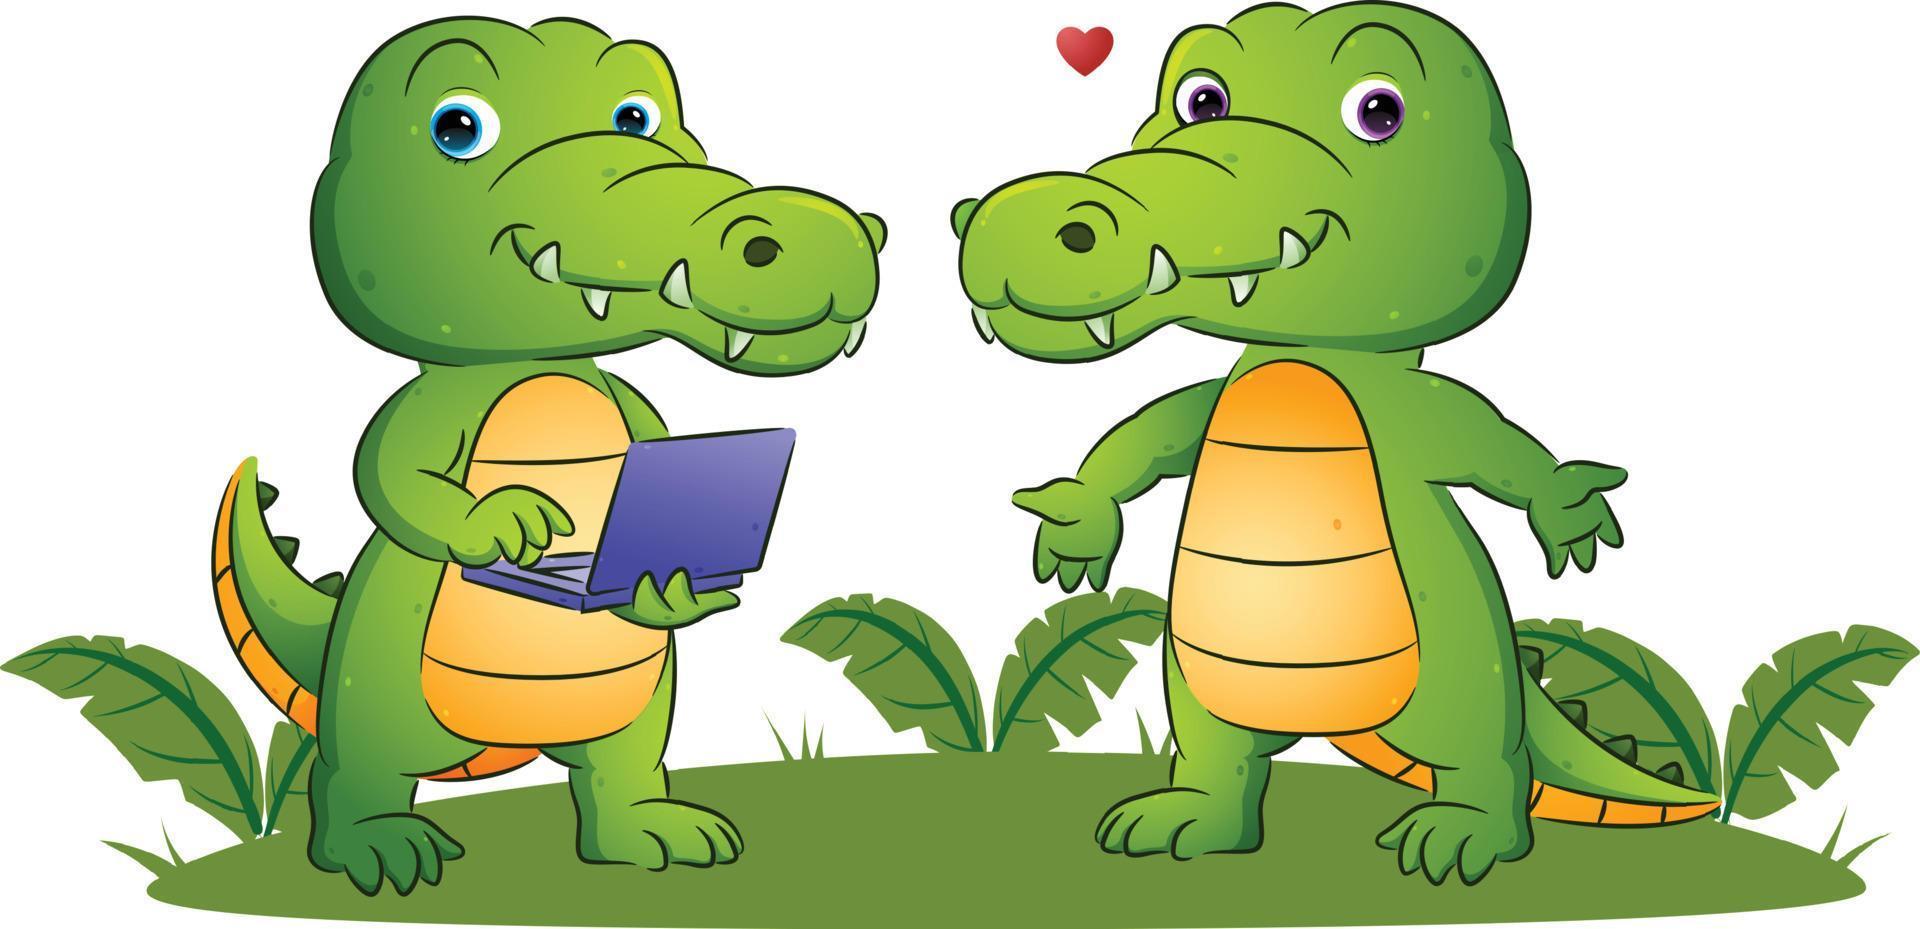 The couple of the smart crocodile is holding the new laptop in the garden vector